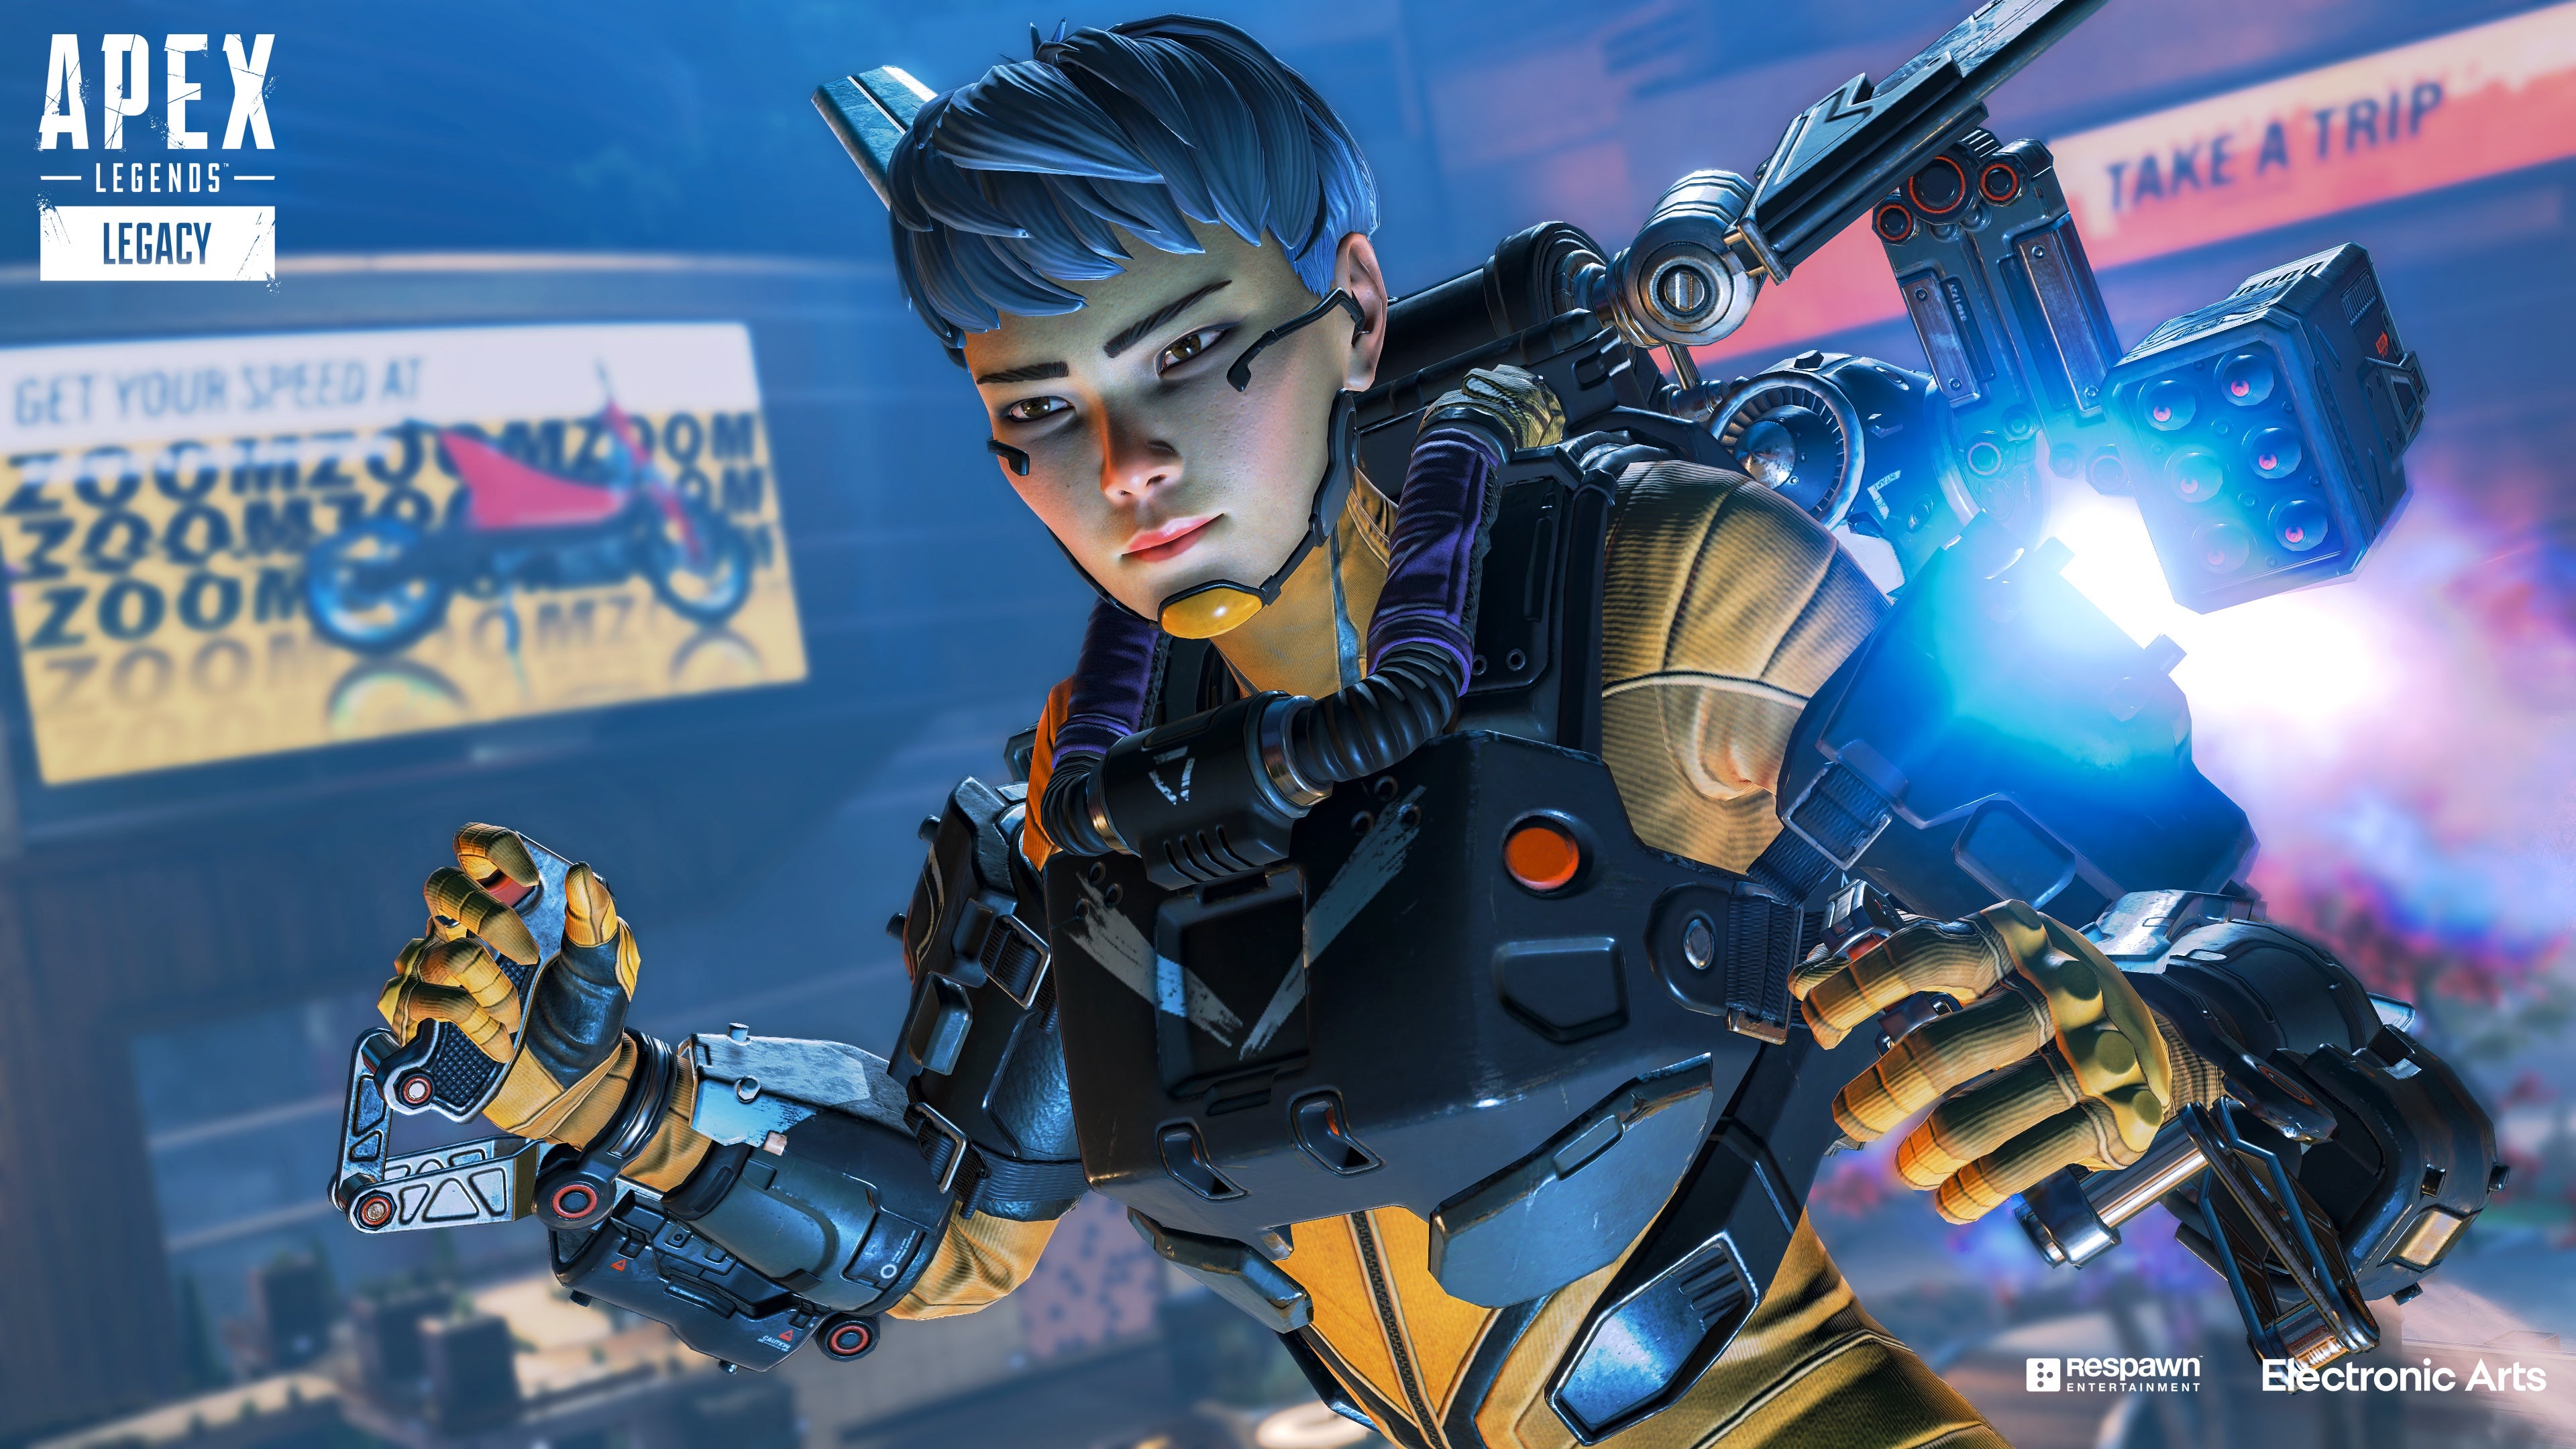 Image for Apex Legends' latest trailer shows off PvP Arenas and more Season 9 content